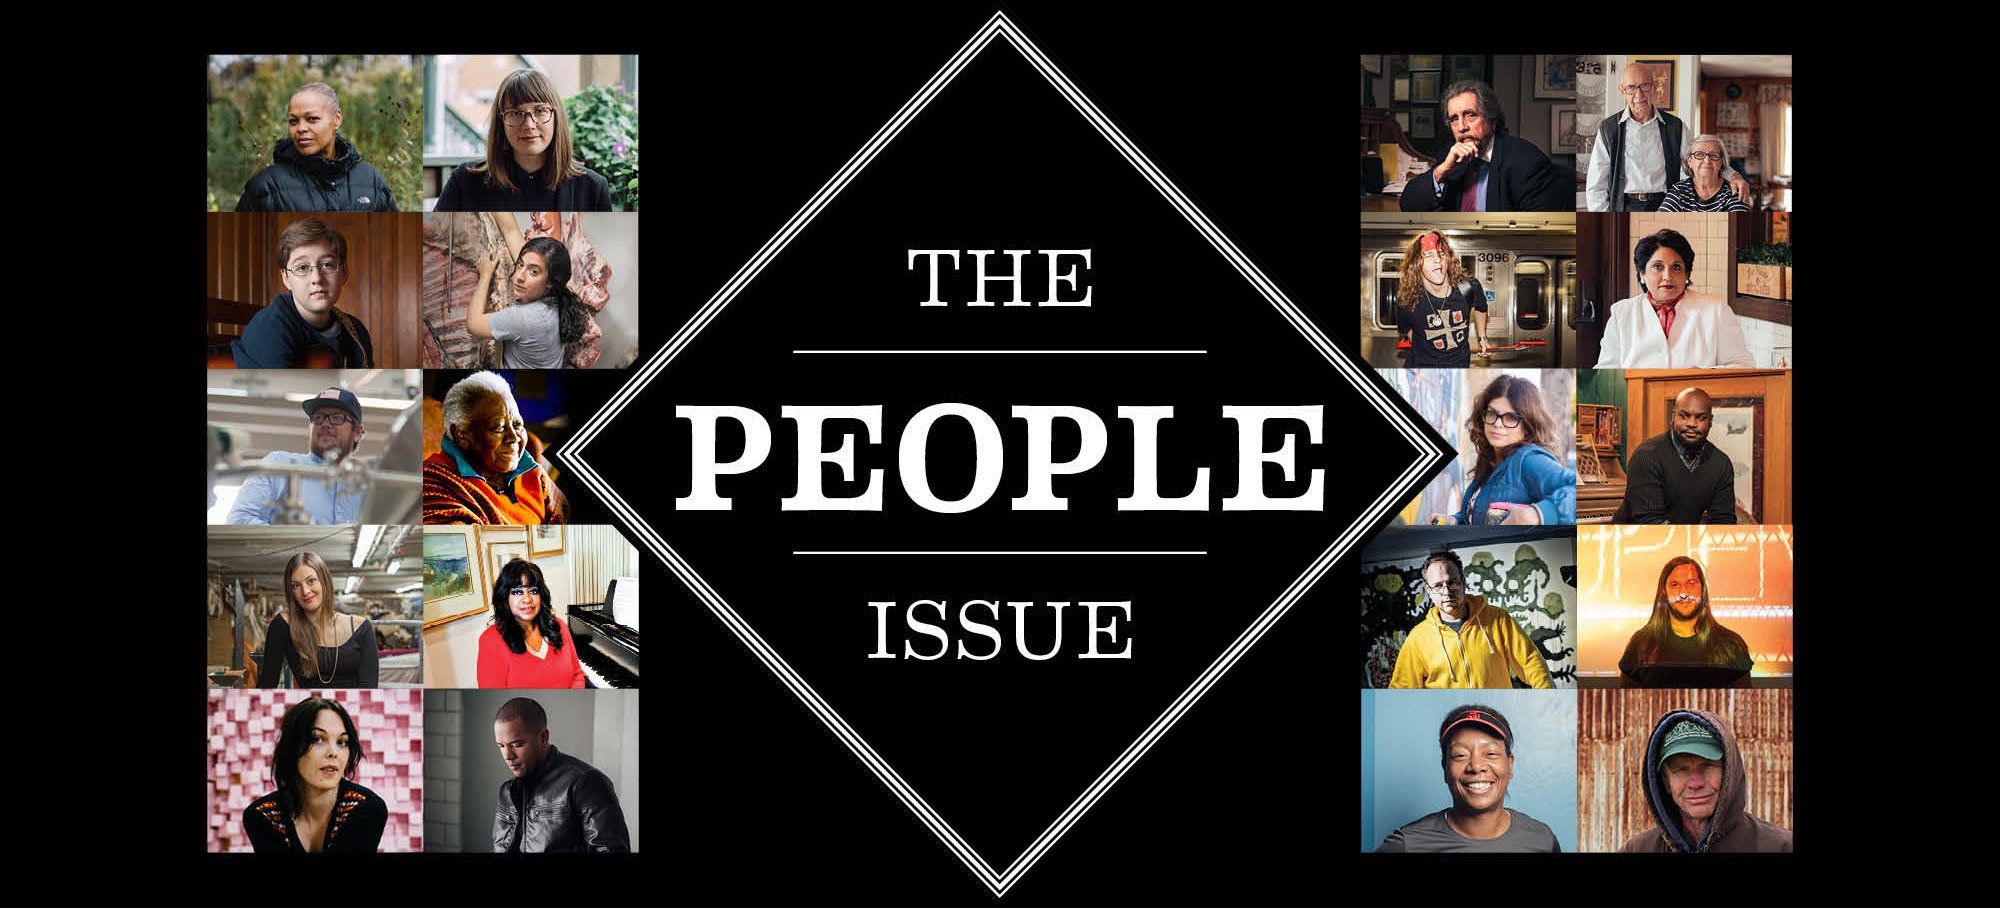 The People Issue